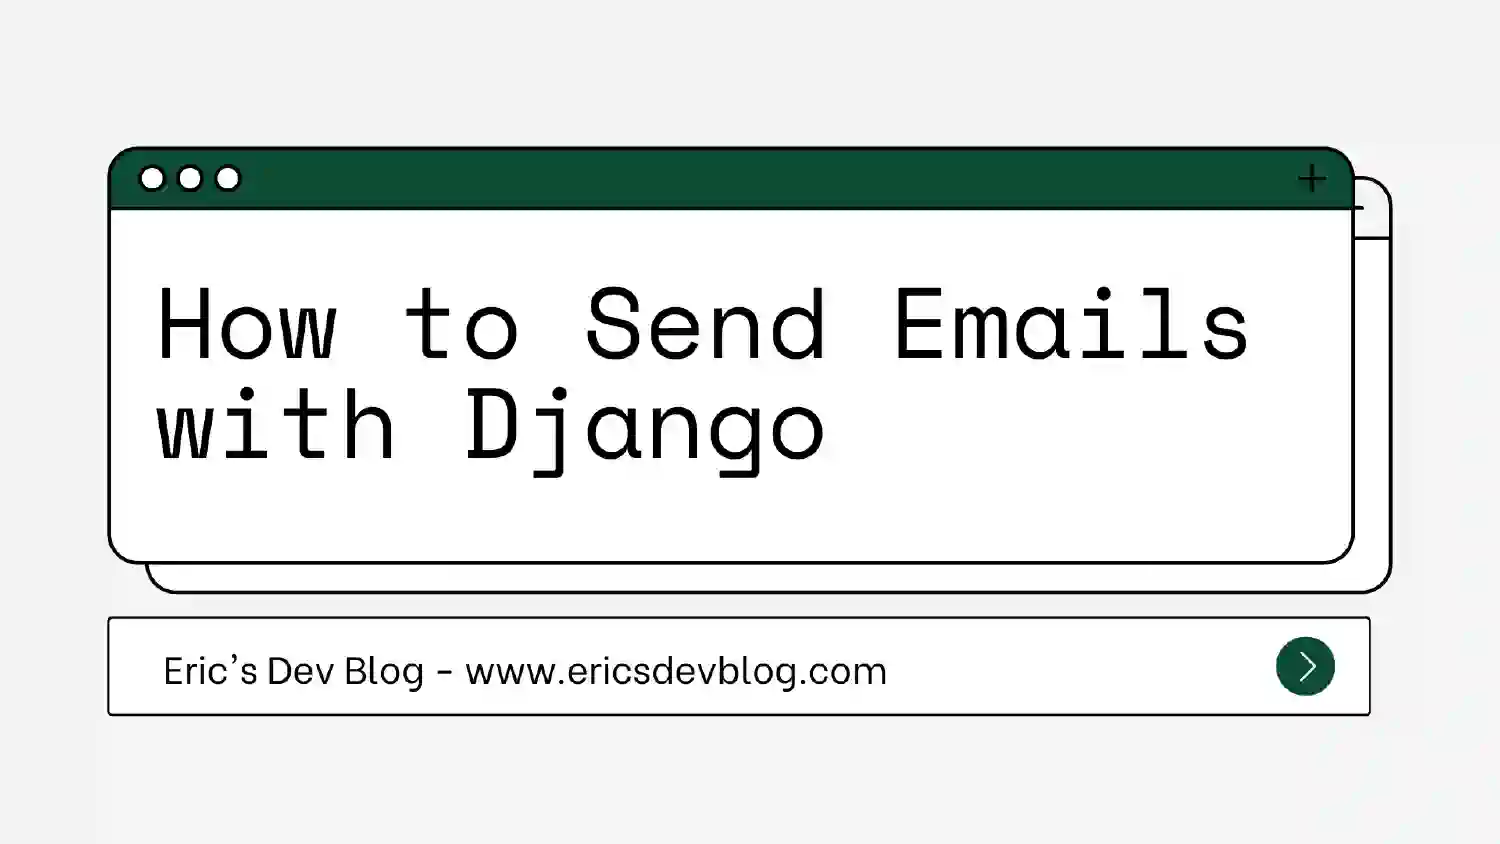 How to Send Emails with Django